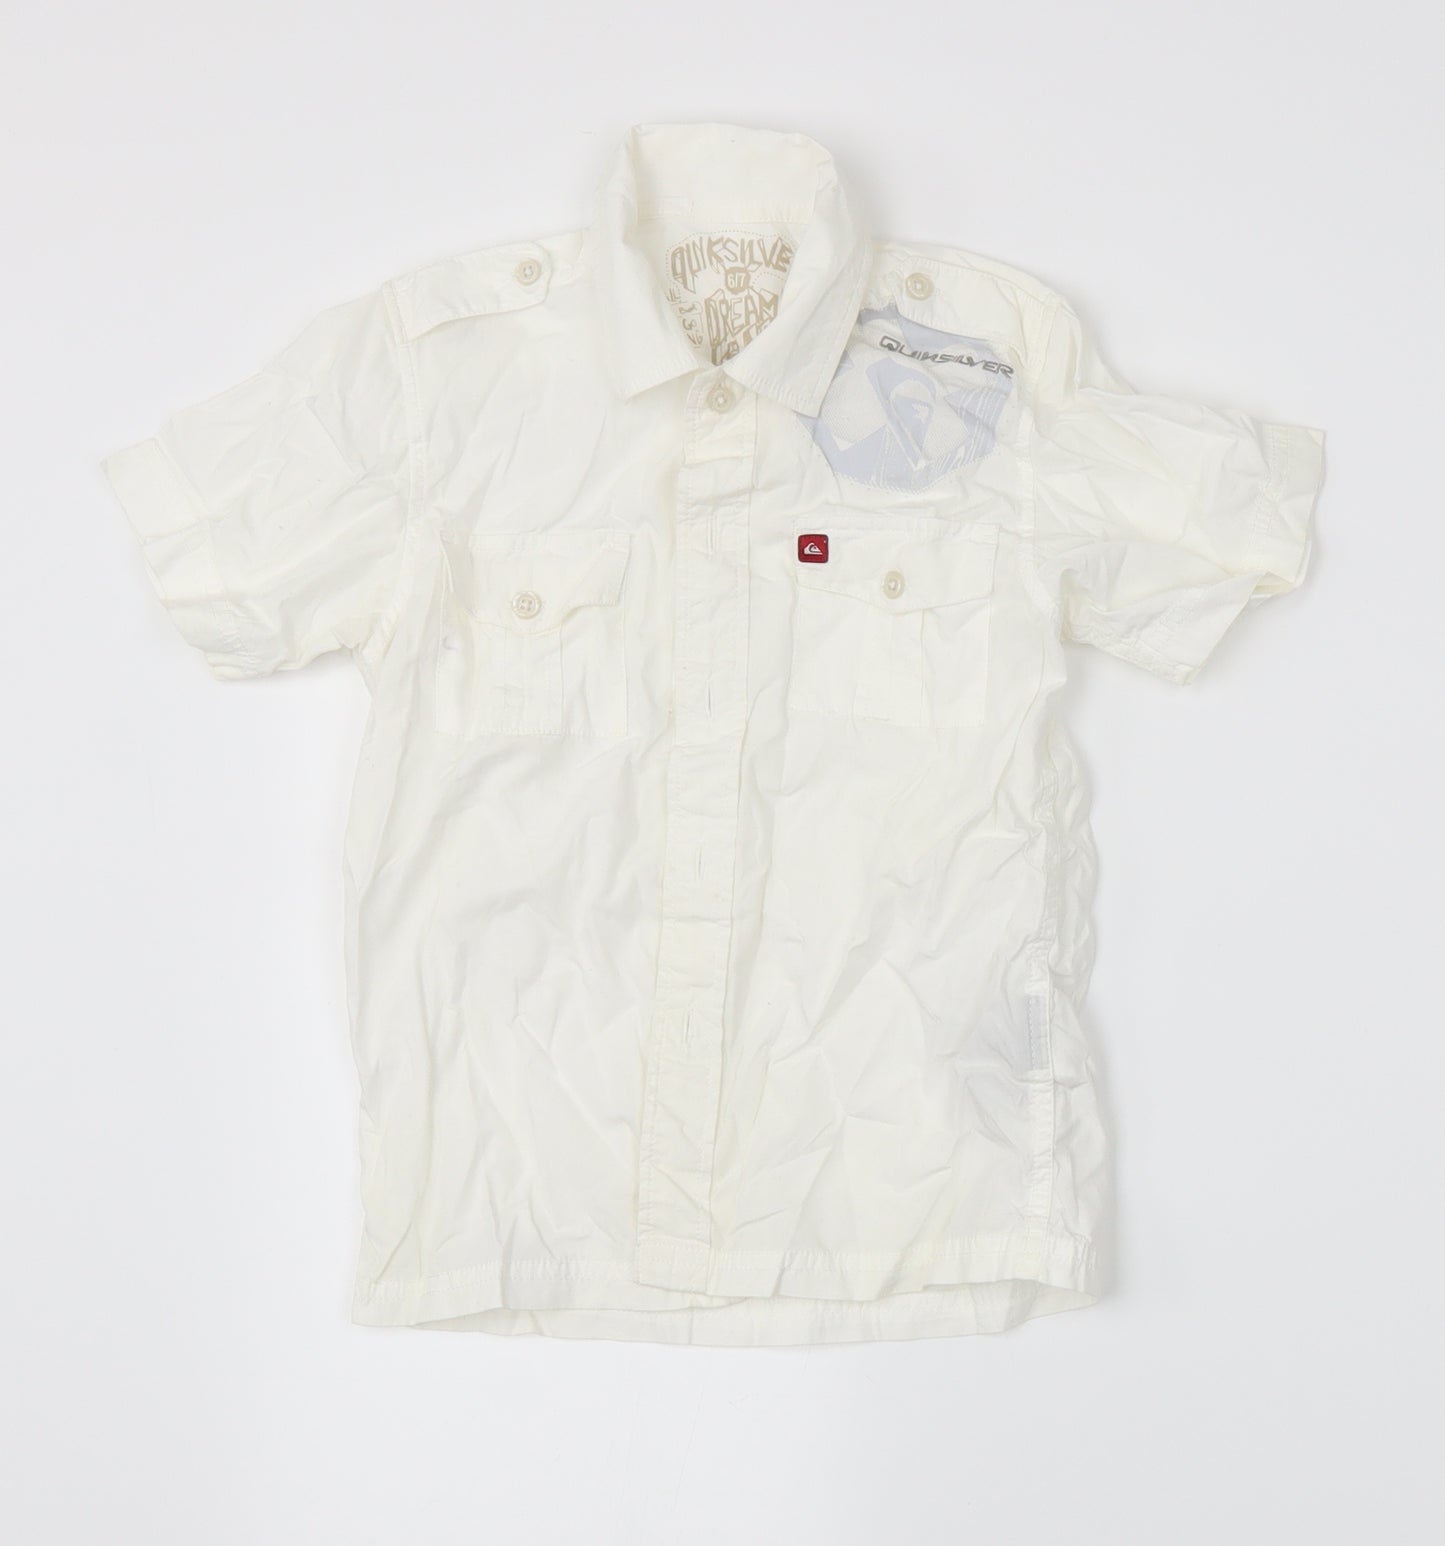 Quiksilver Boys White   Basic Button-Up Size 6-7 Years